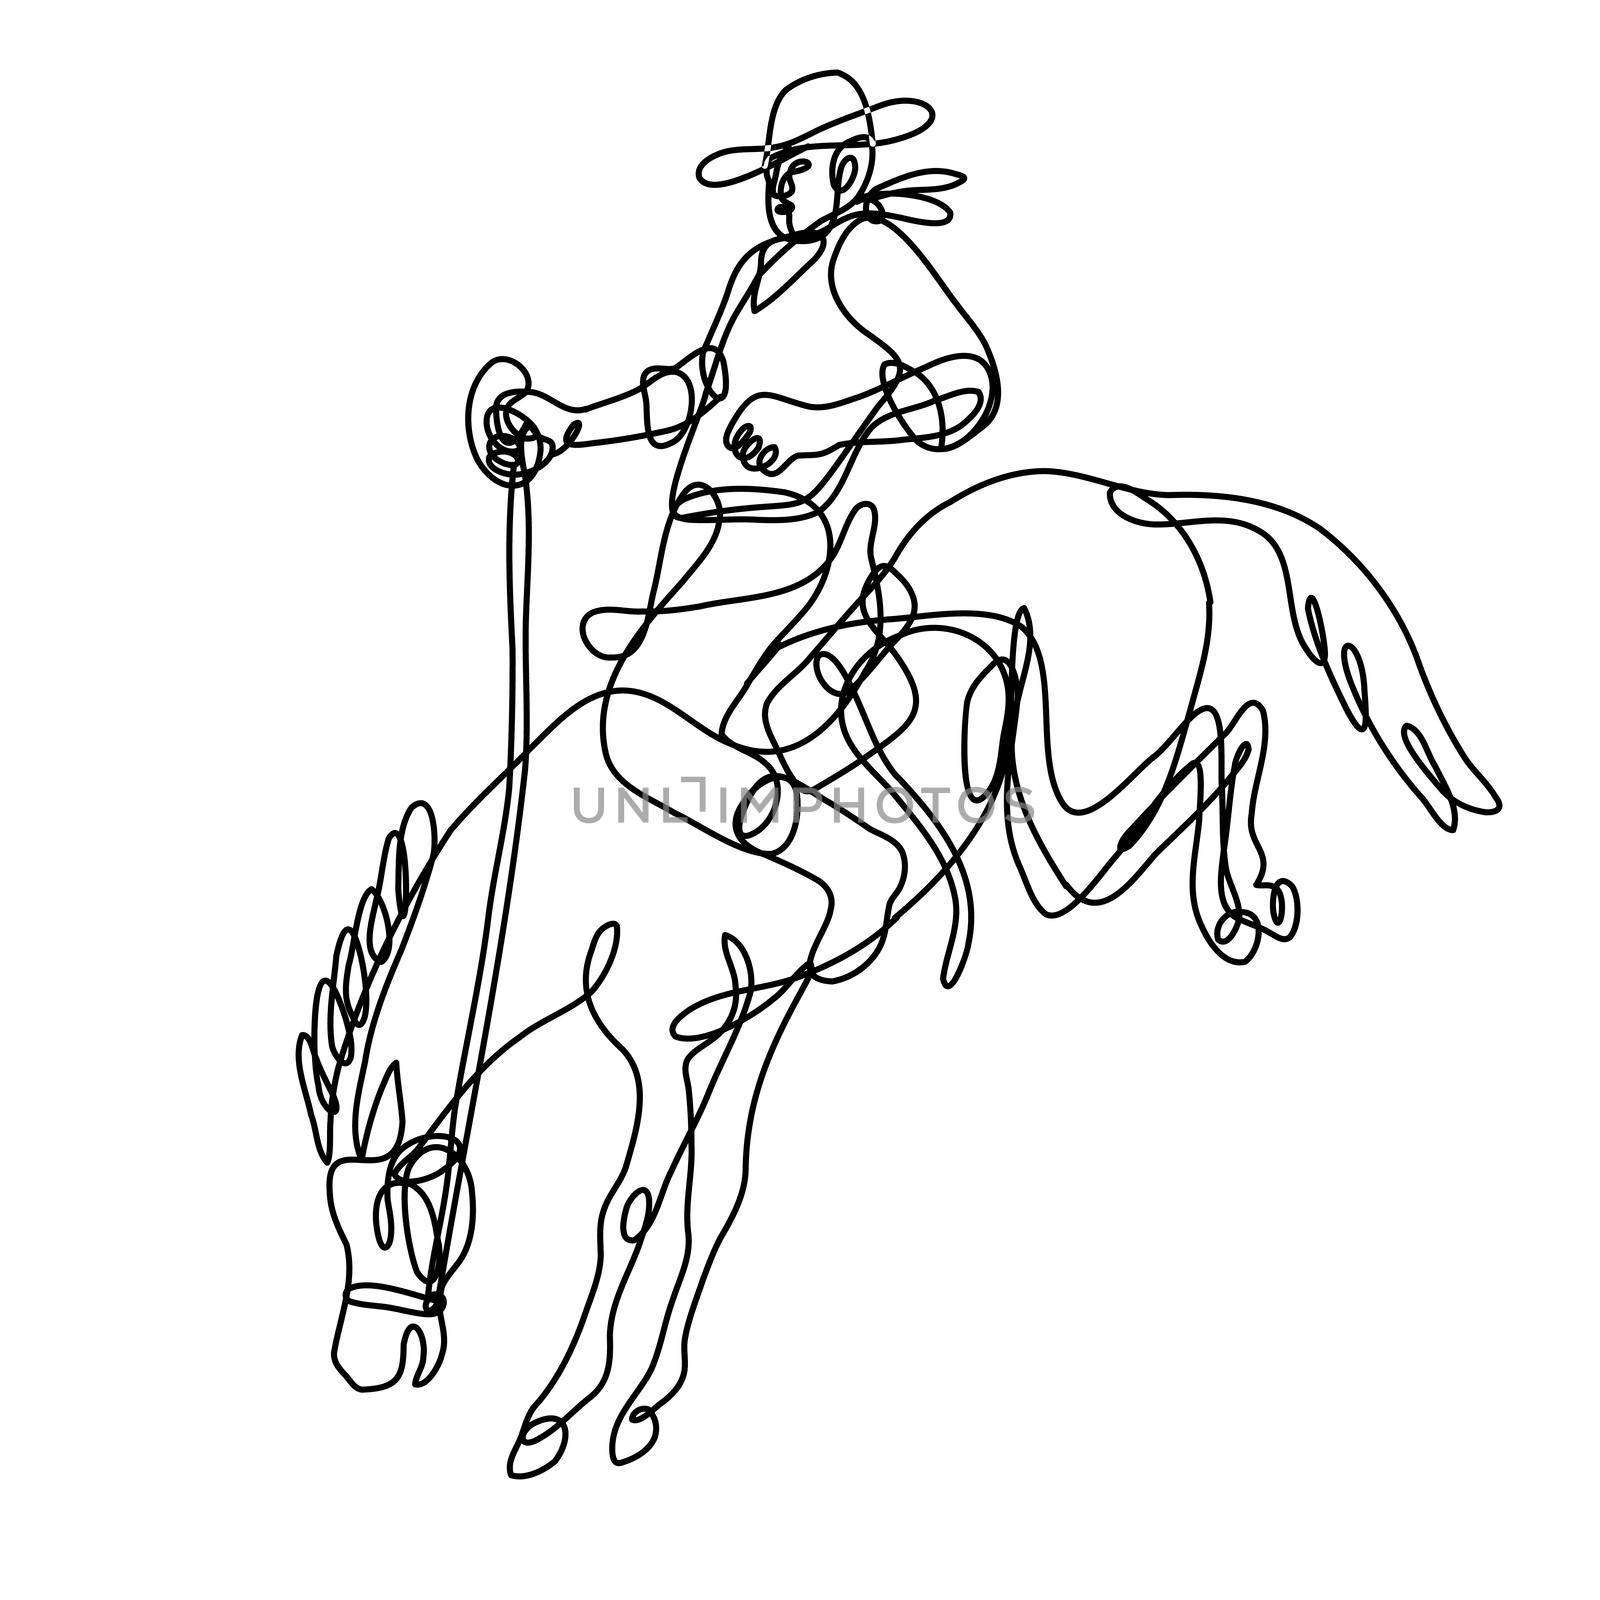 Continuous line drawing illustration of a rodeo cowboy riding bucking bronco side view  done in mono line or doodle style in black and white on isolated background. 